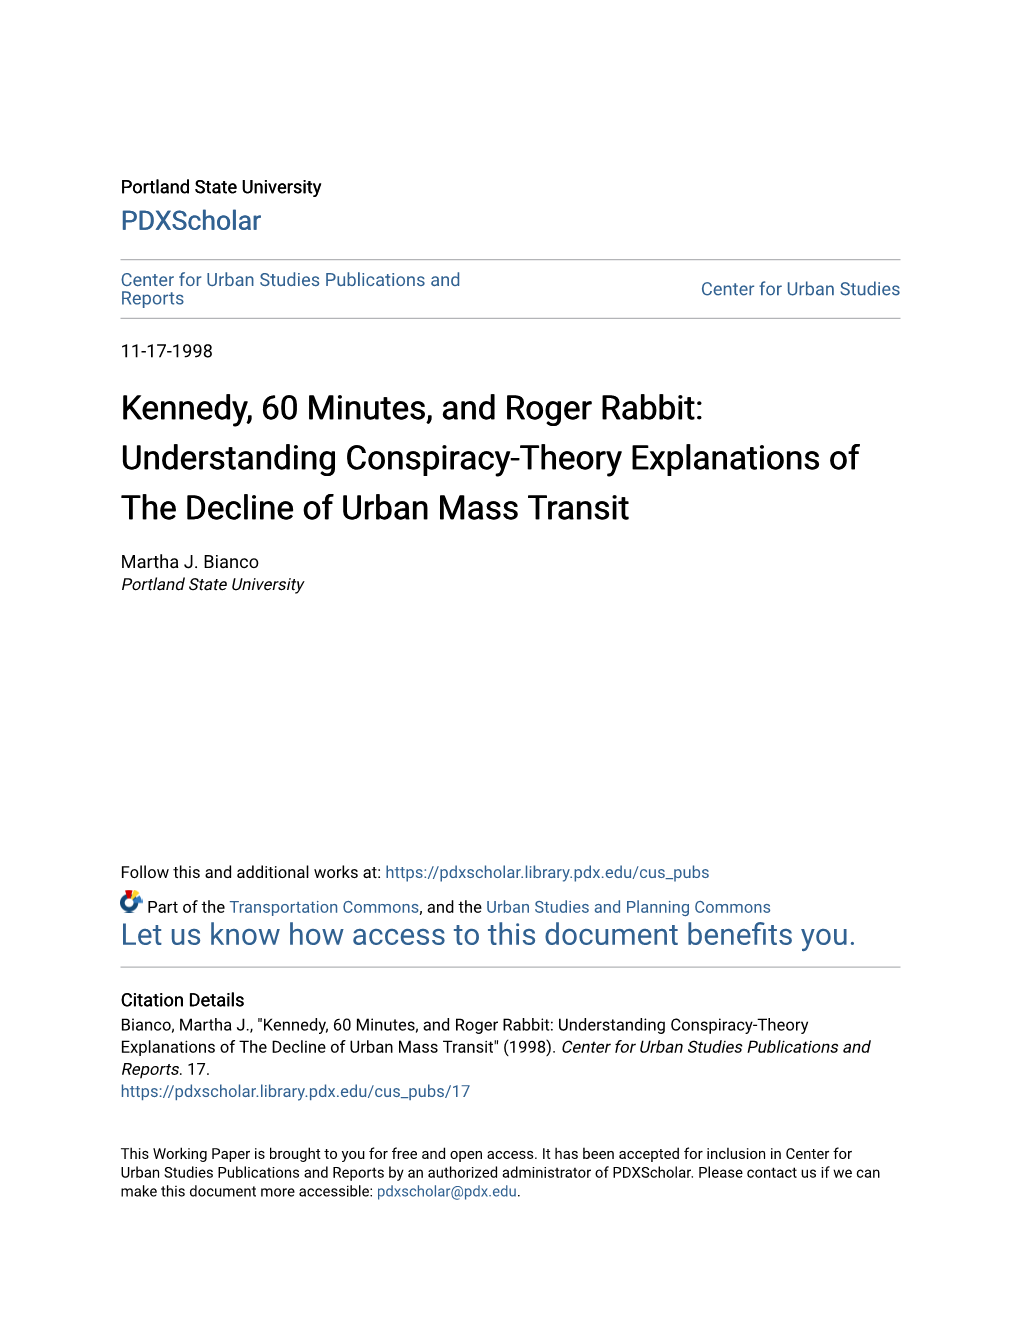 Understanding Conspiracy-Theory Explanations of the Decline of Urban Mass Transit